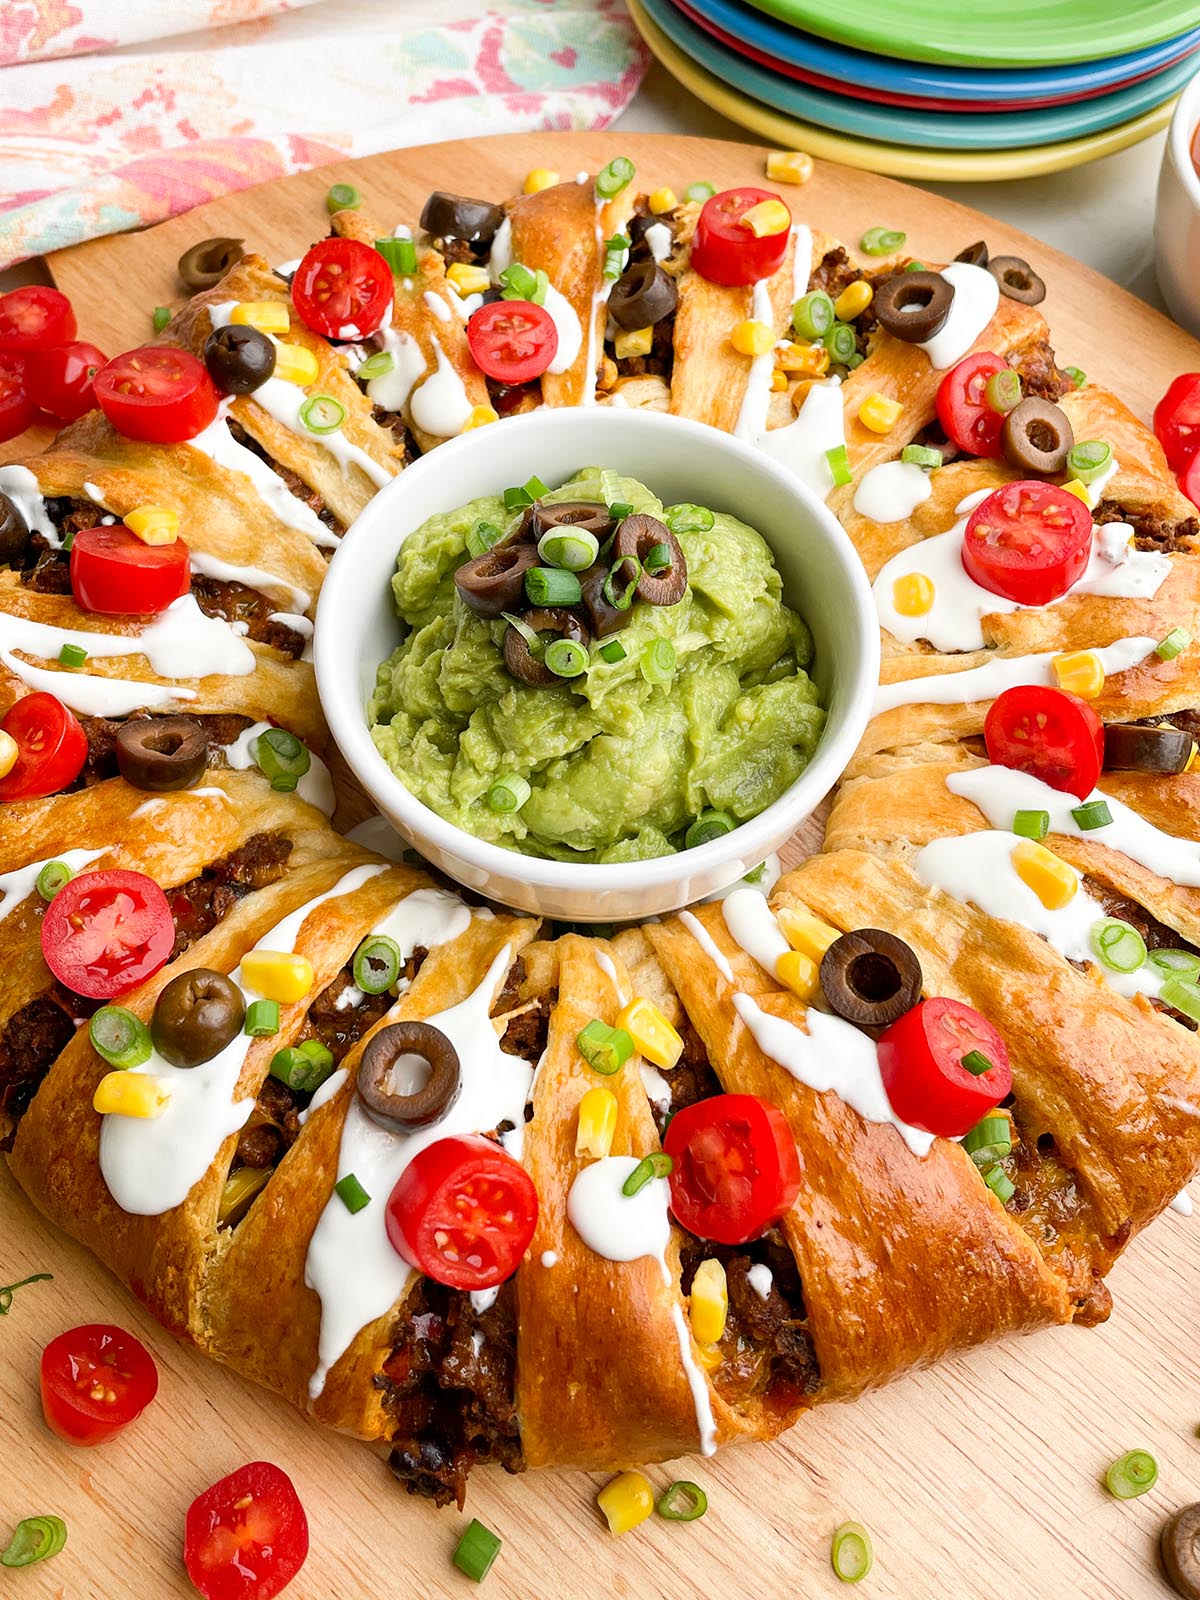 taco ring covered in toppings with guacamole in the center on a wooden cutting board